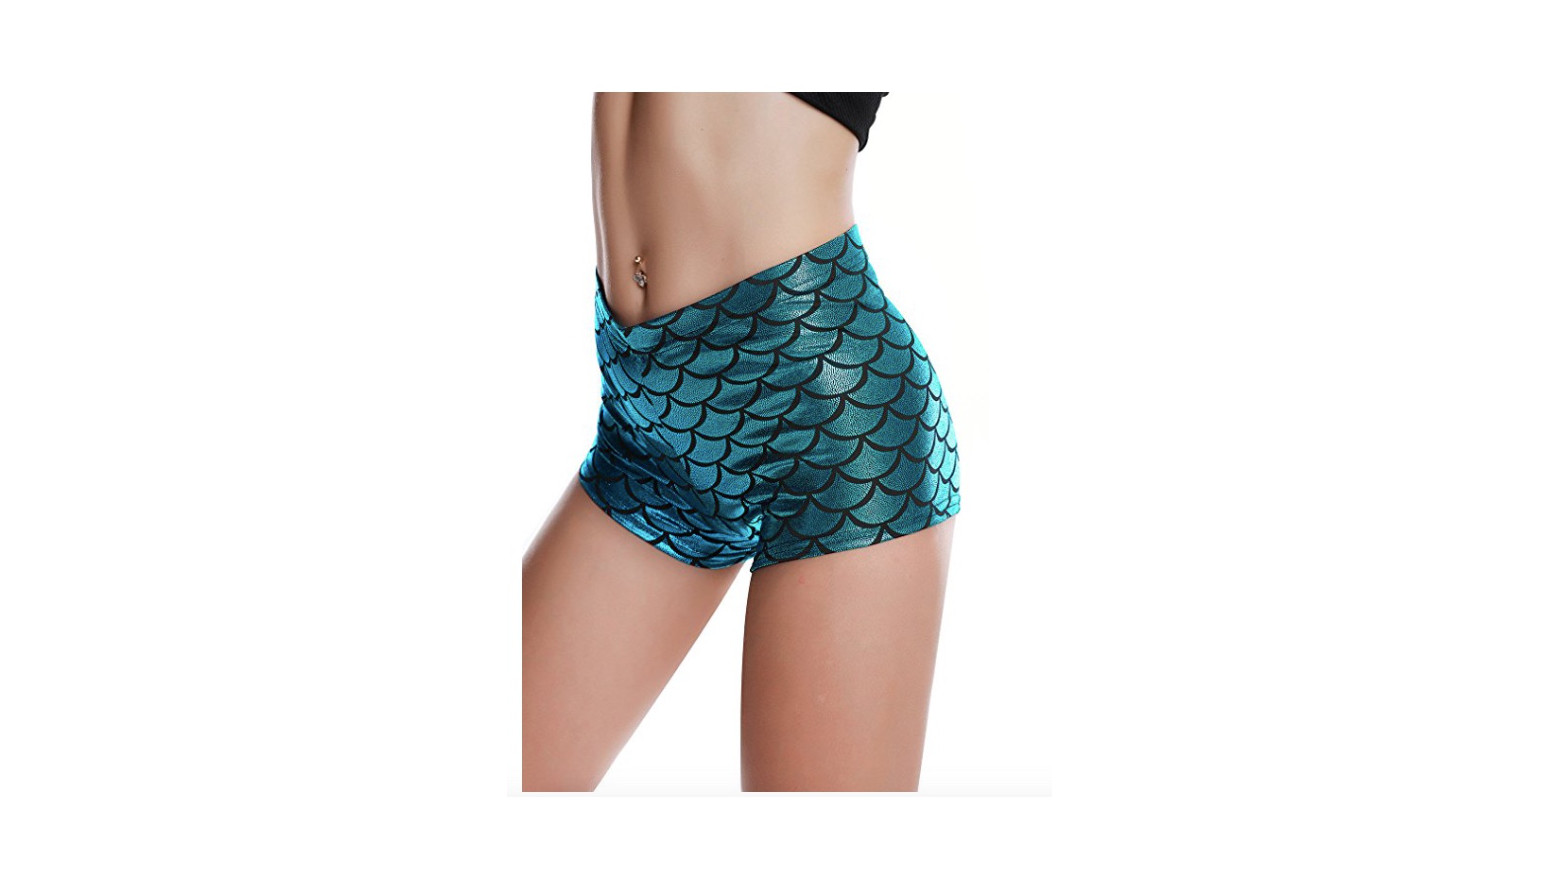 Summer Musical Festival Rave Outfits Holographic Mermaid Sequin High Waisted Shorts Bottoms